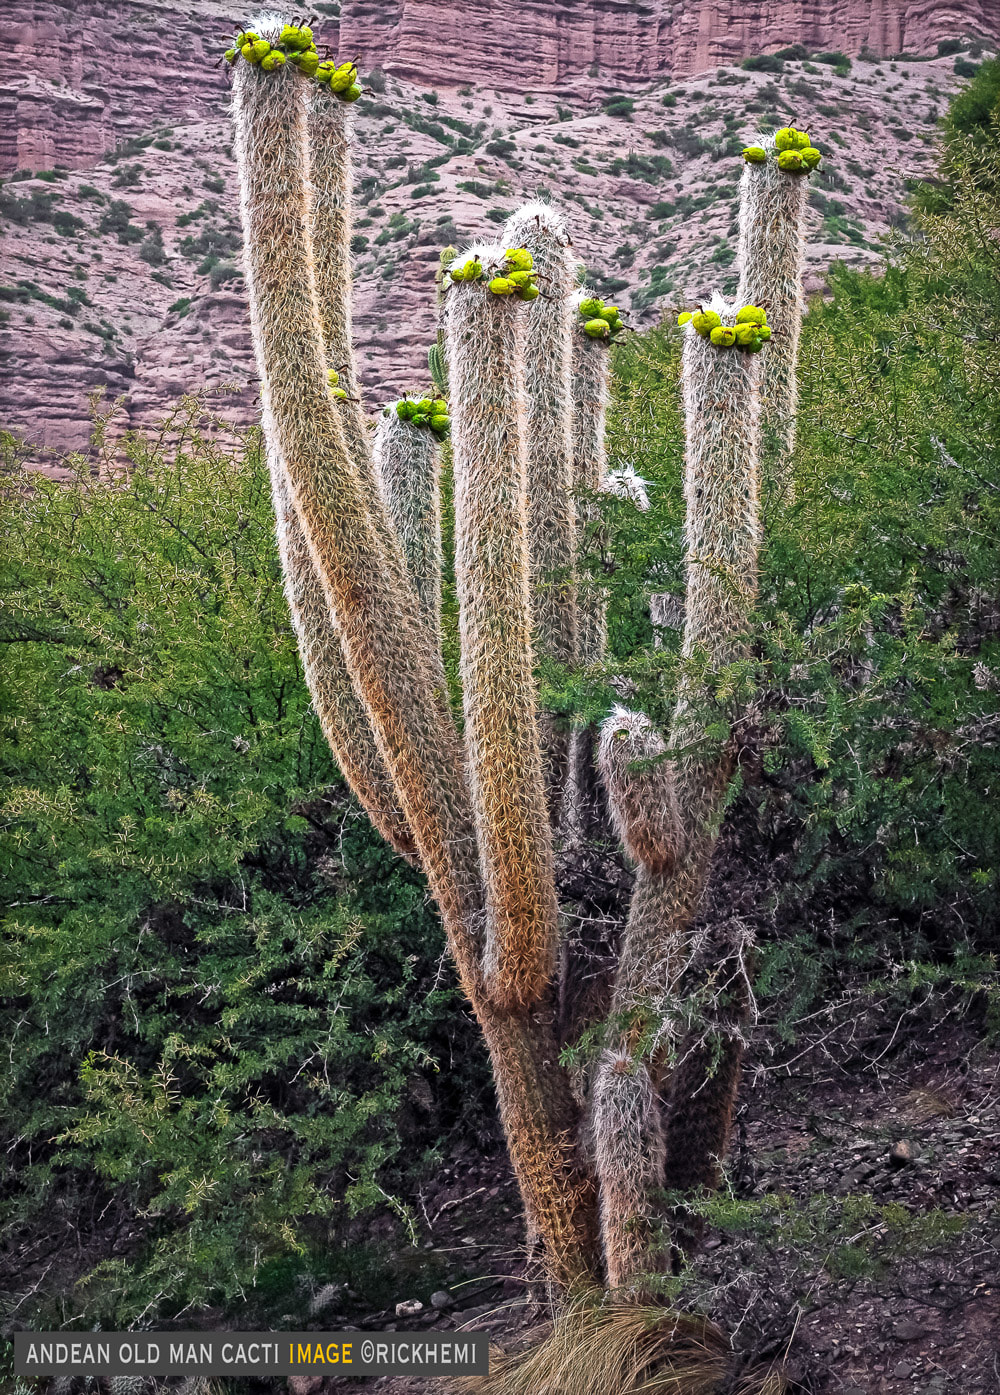 overland travel South America, old man cacti Andean region, image by Rick Hemi